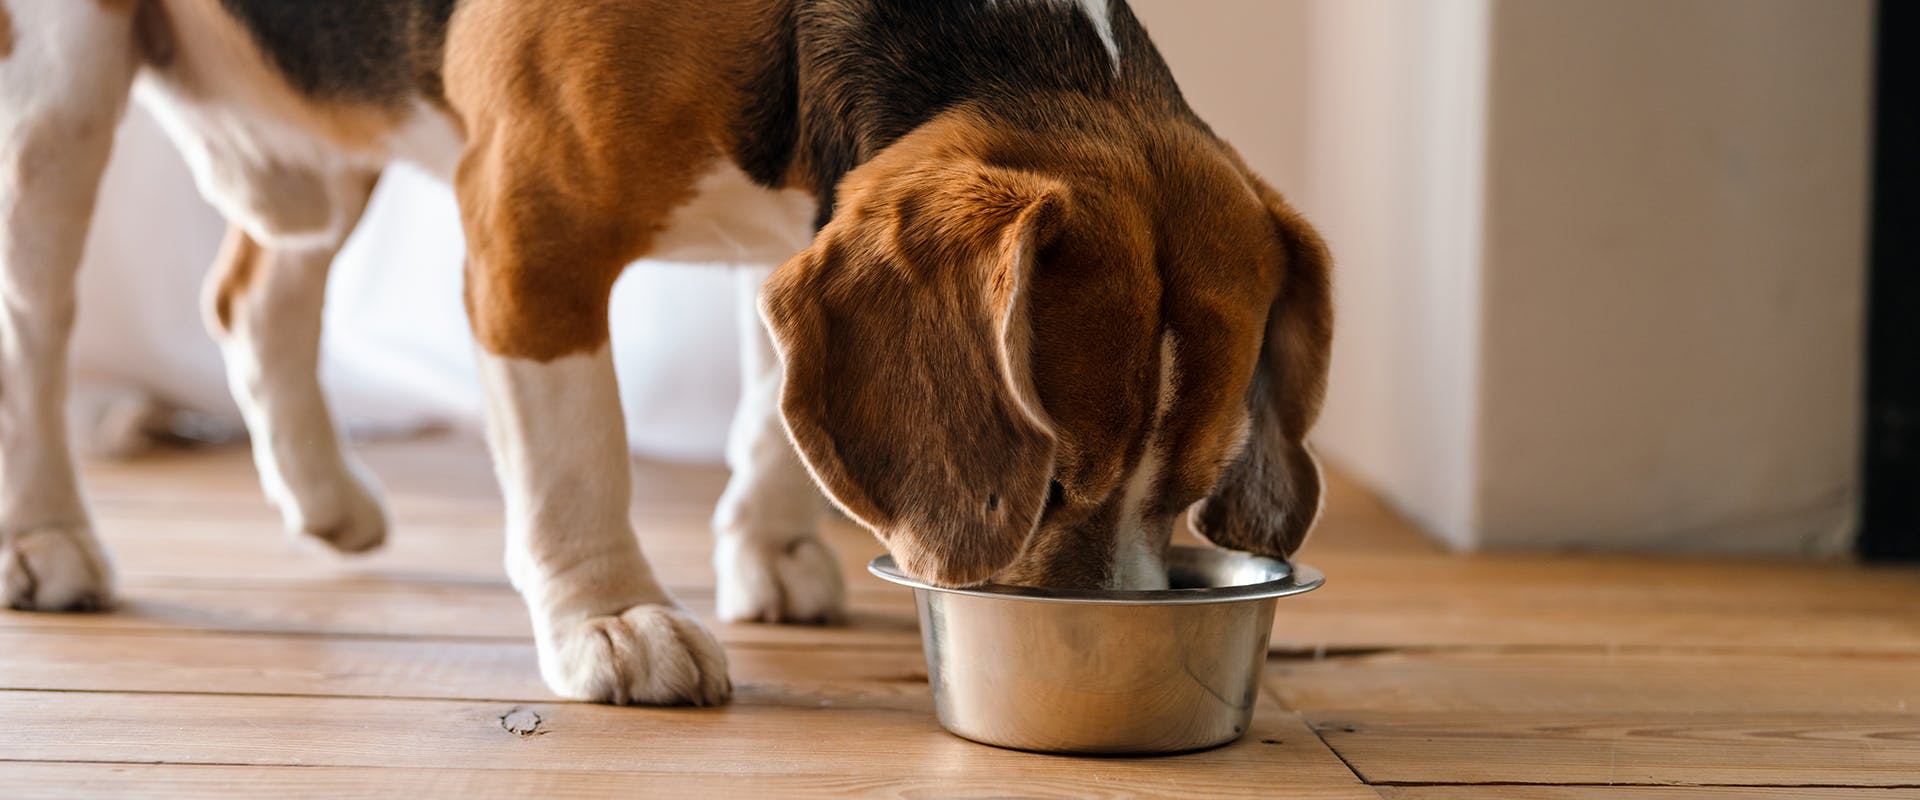 How much should I feed my dog? A Beagle eating from a stainless steel dog bowl